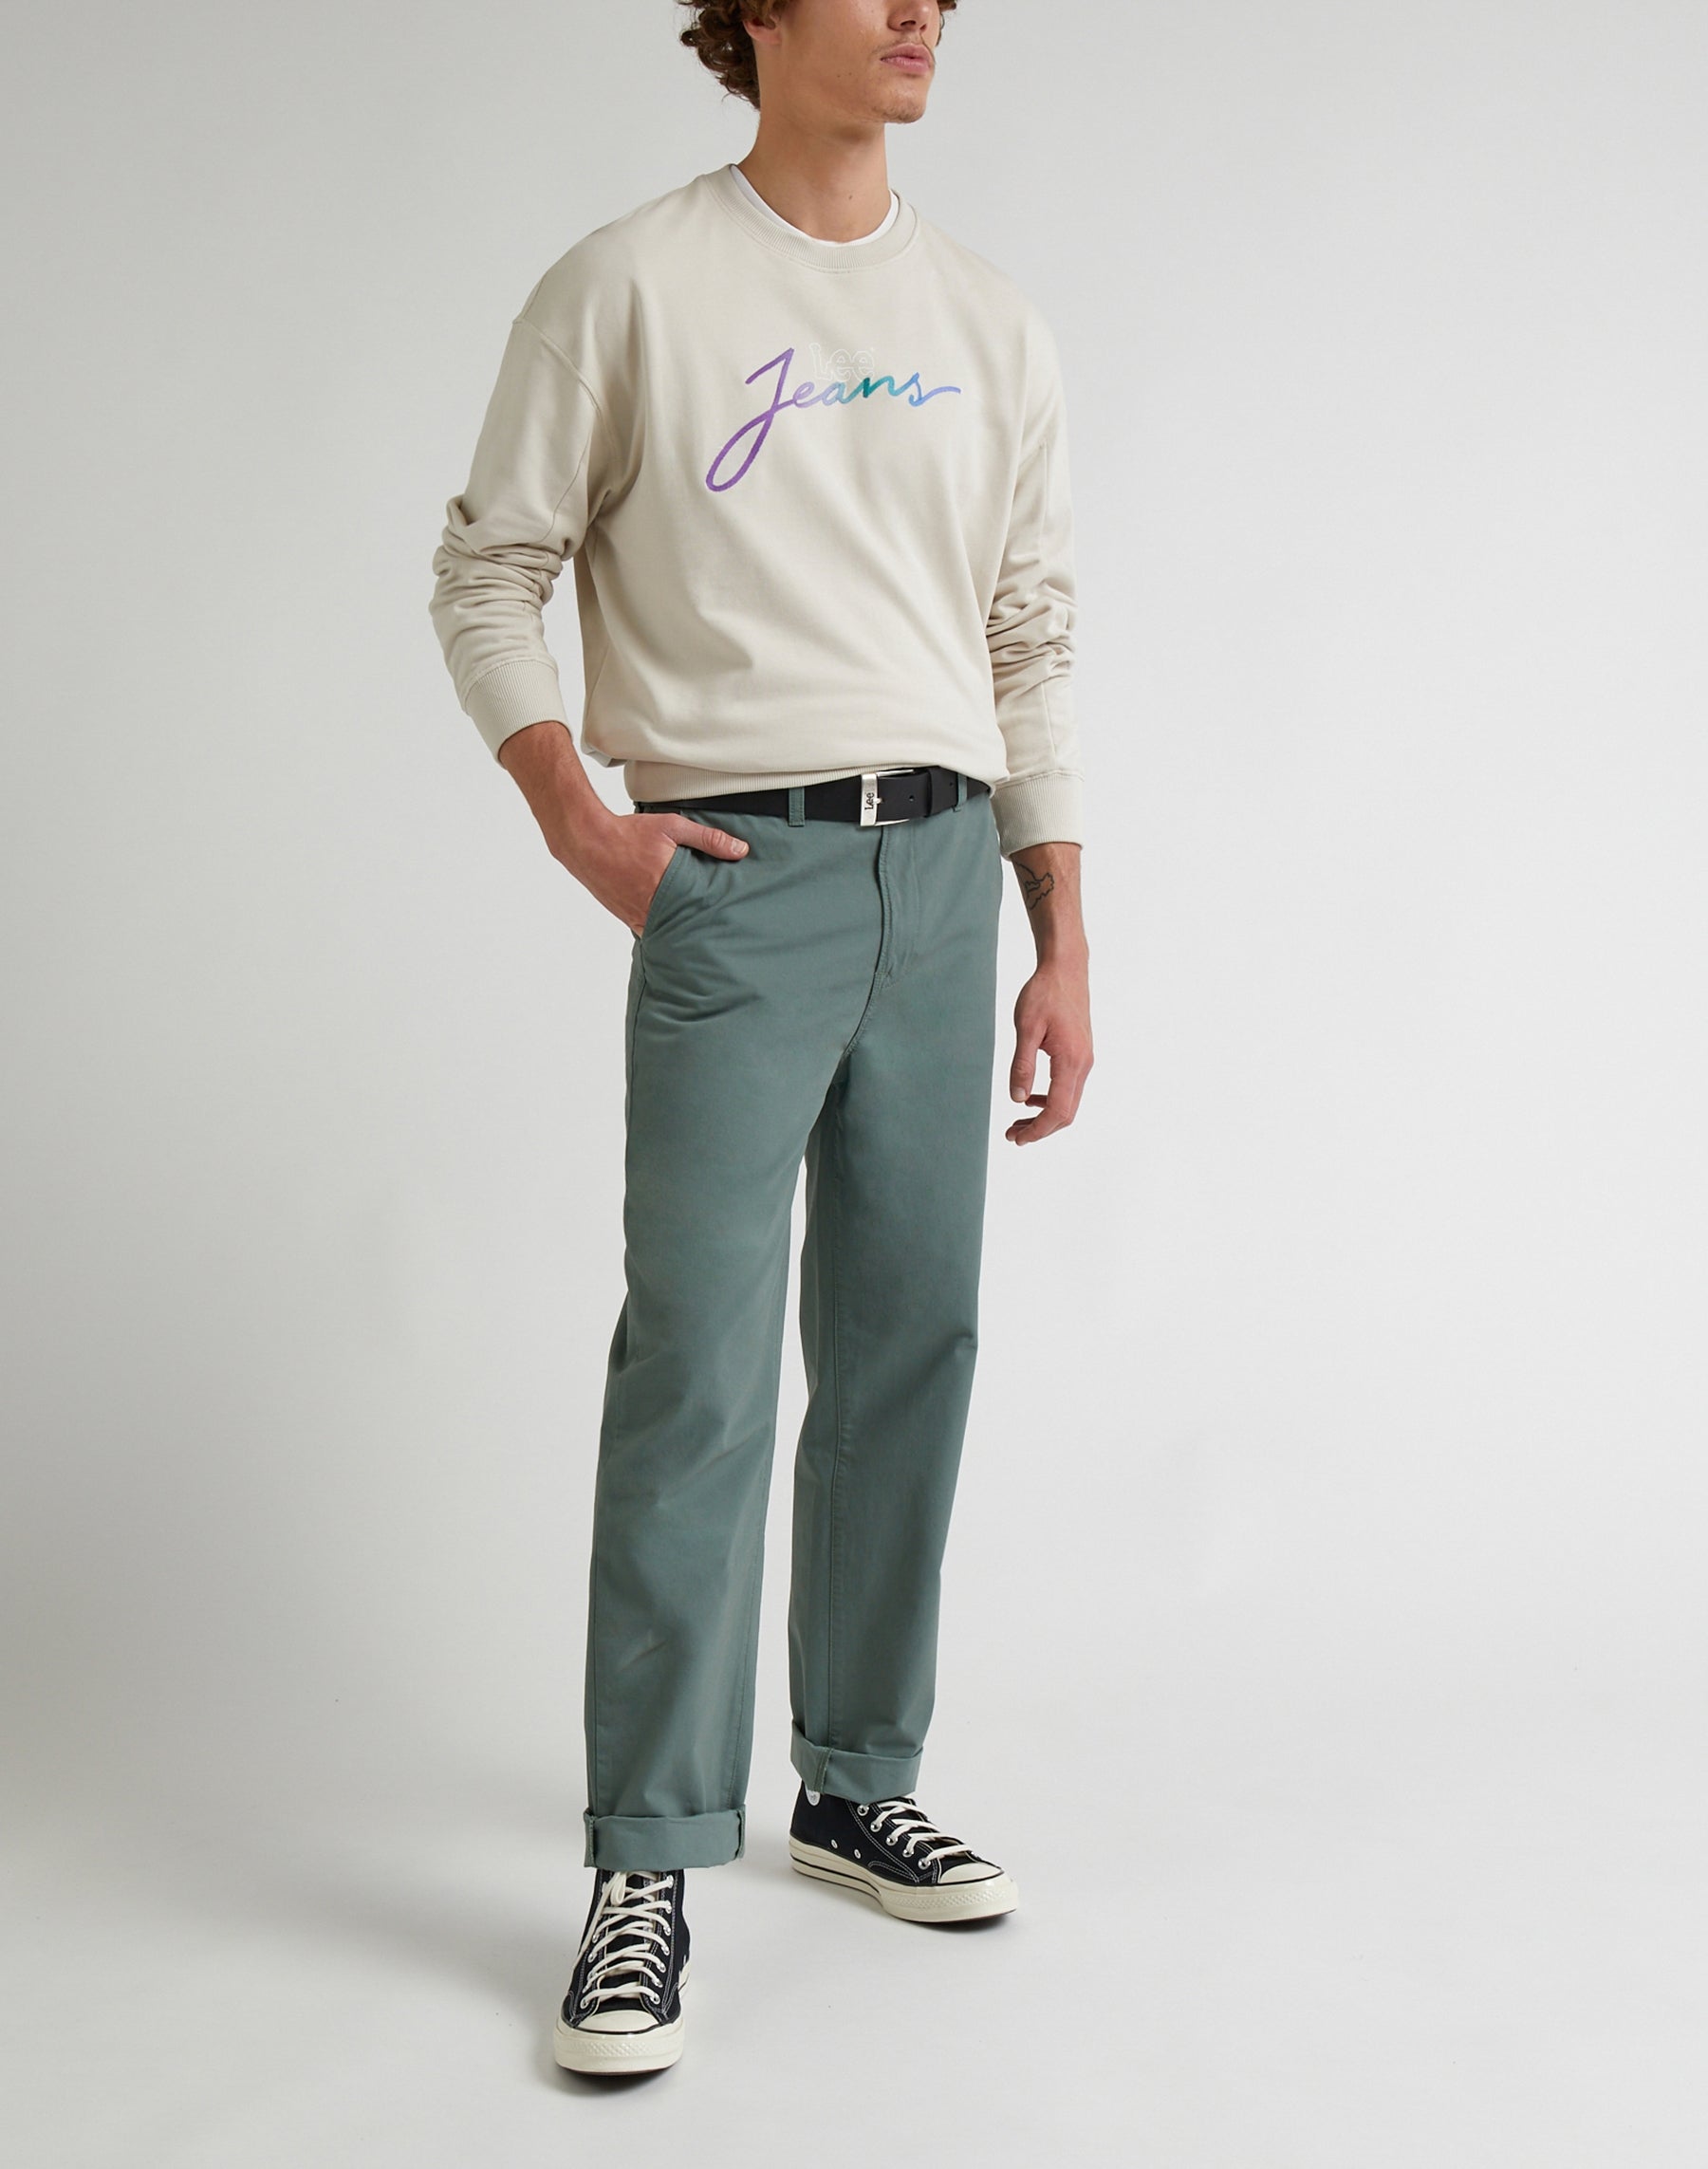 Relaxed Chino in Fort Green Hosen Lee   